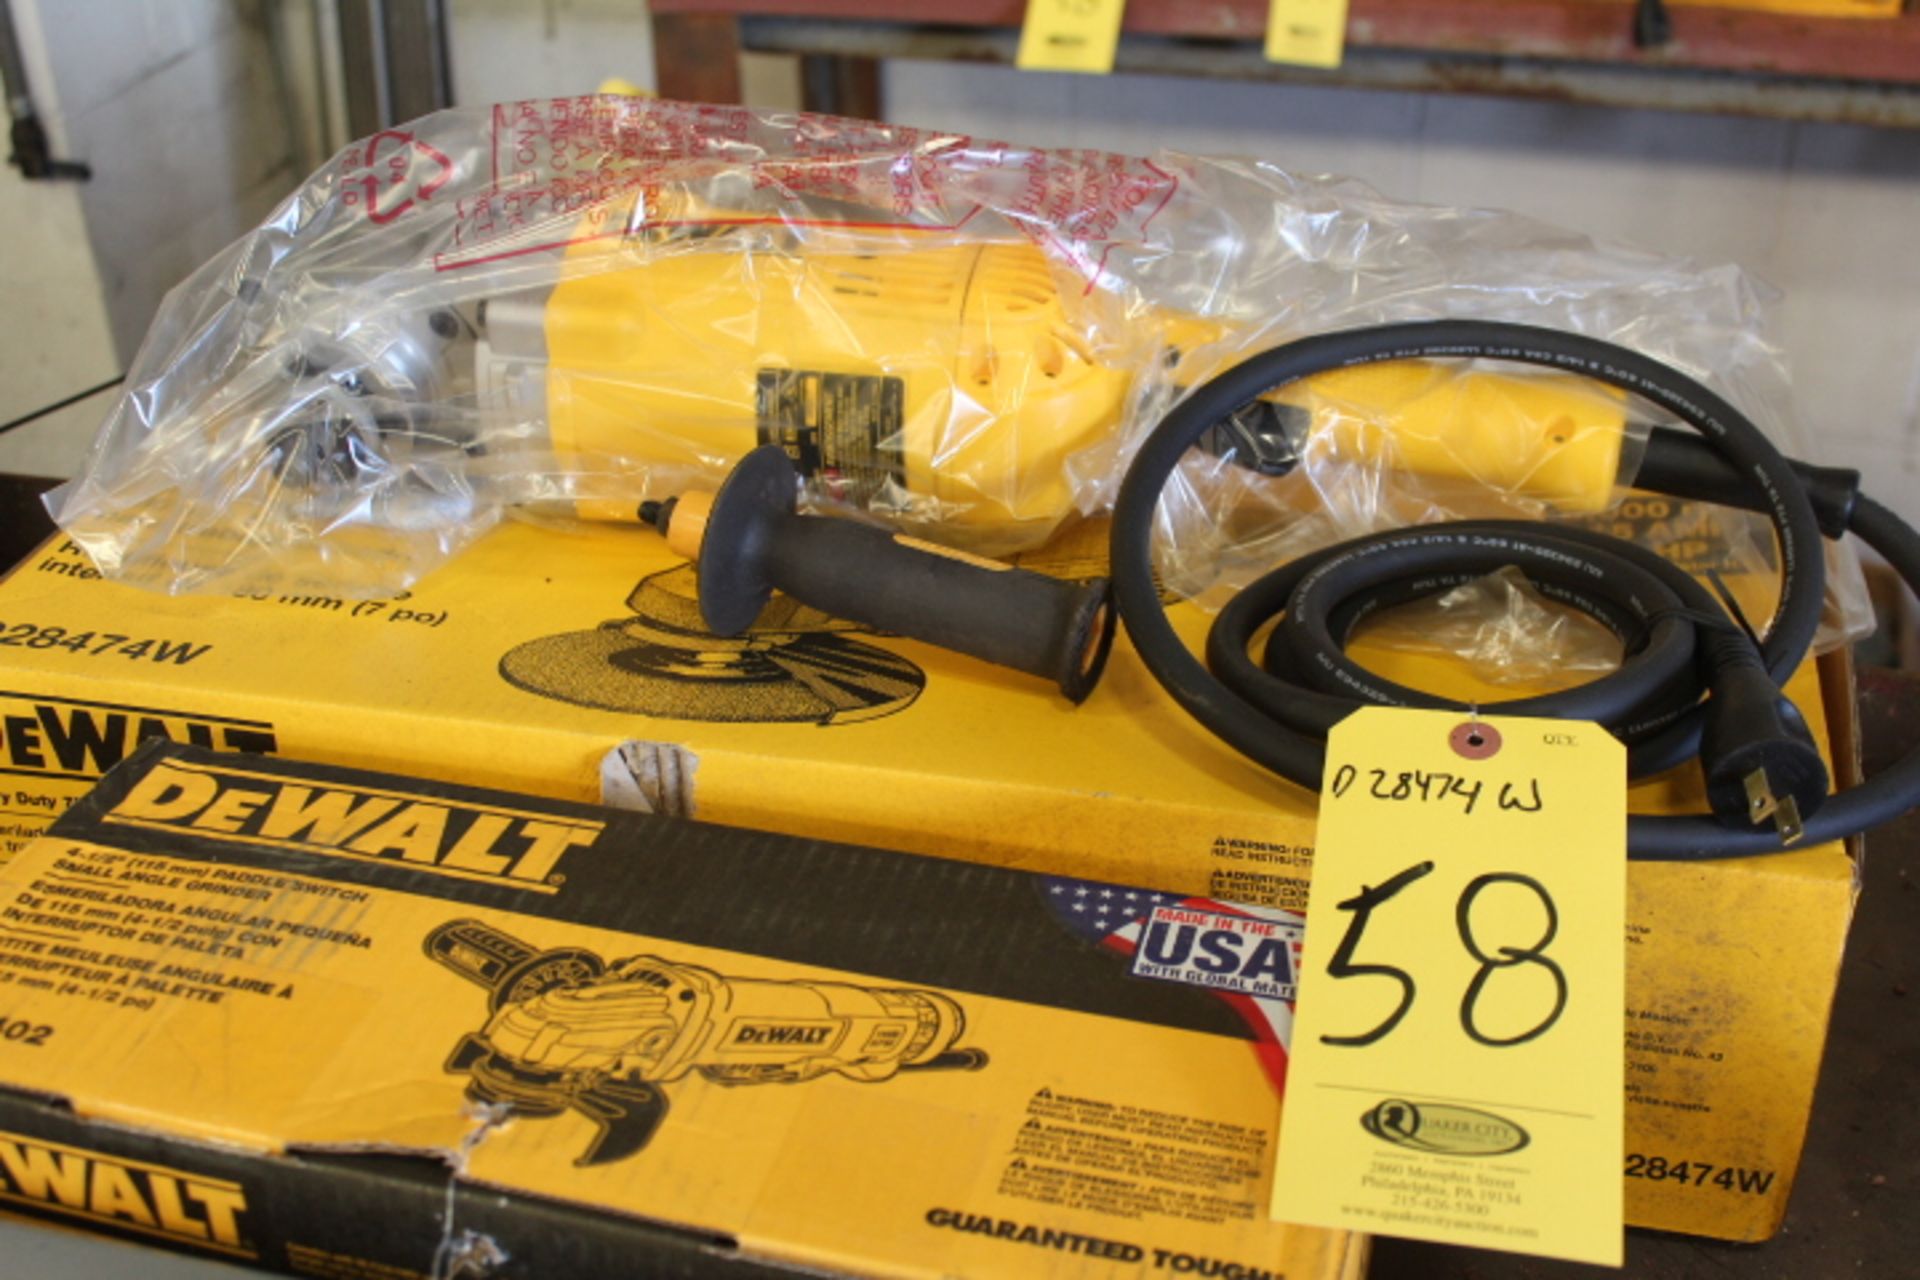 NEW DEWALT D2847W HD 7 IN. RIGHT ANGLE GRINDER